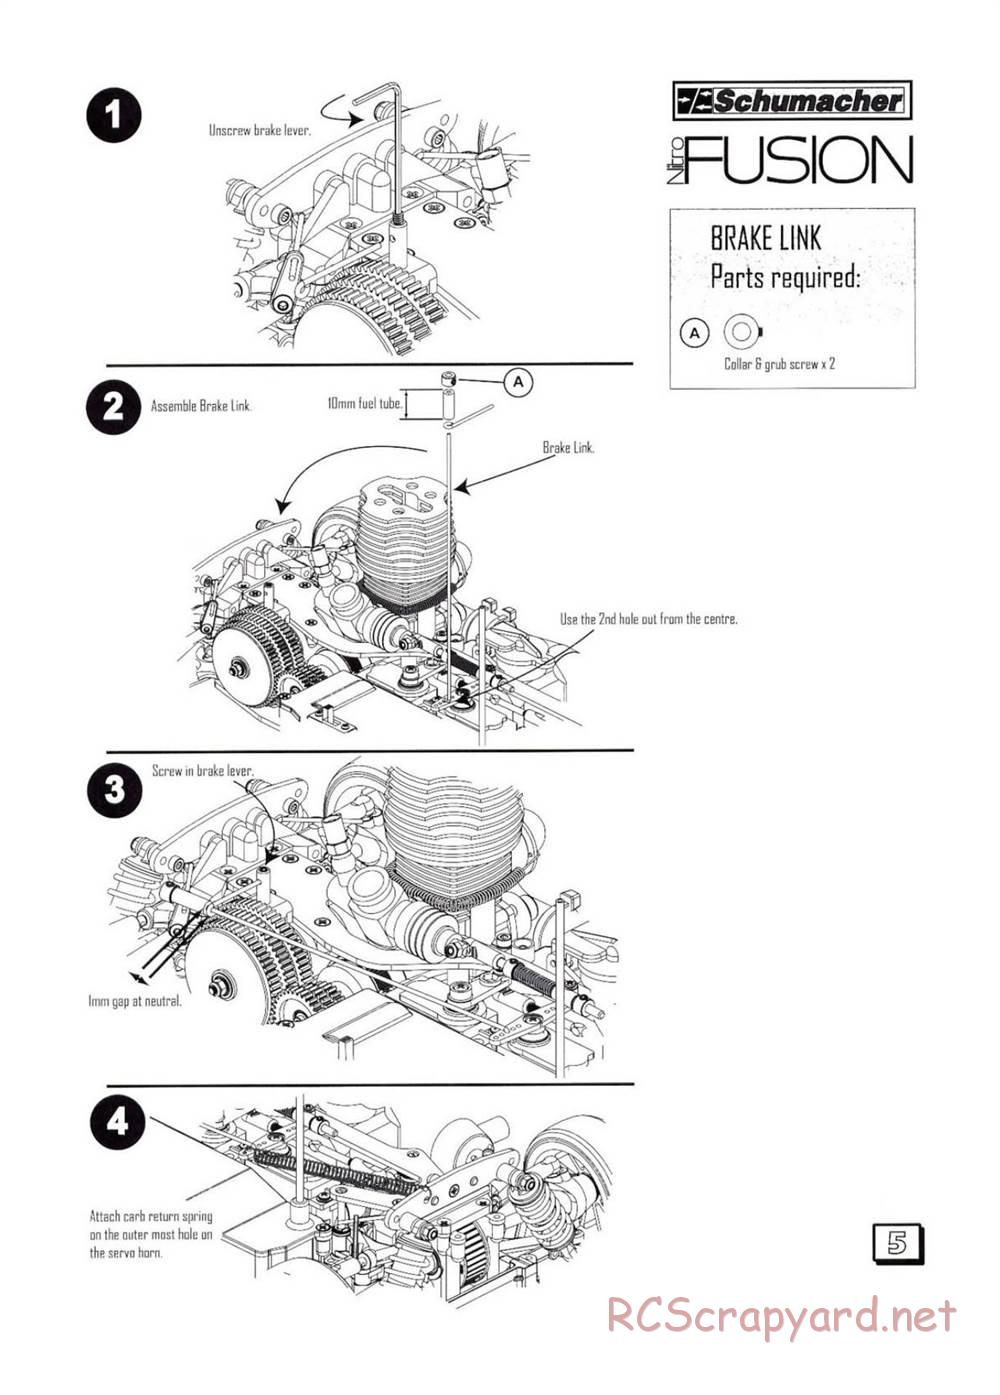 Schumacher - Fusion 21 - Manual - Page 21